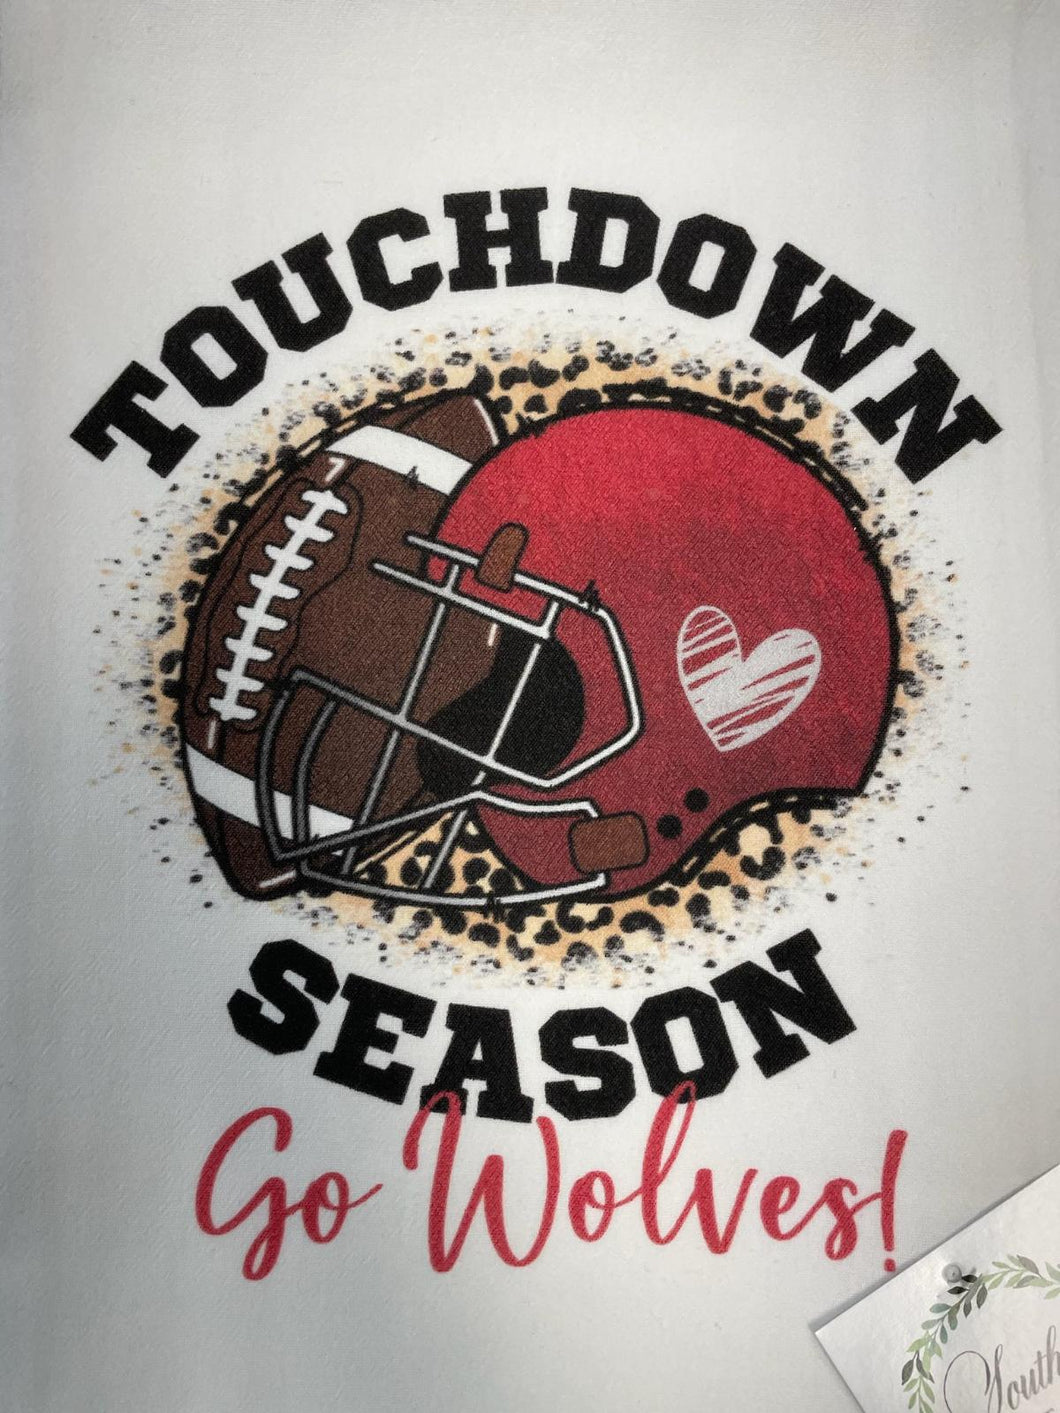 SOUTHERN SISTERS HOME TOUCHDOWN SEASON NEWBERRY COLLEGE GO WOLVES TEA TOWELS